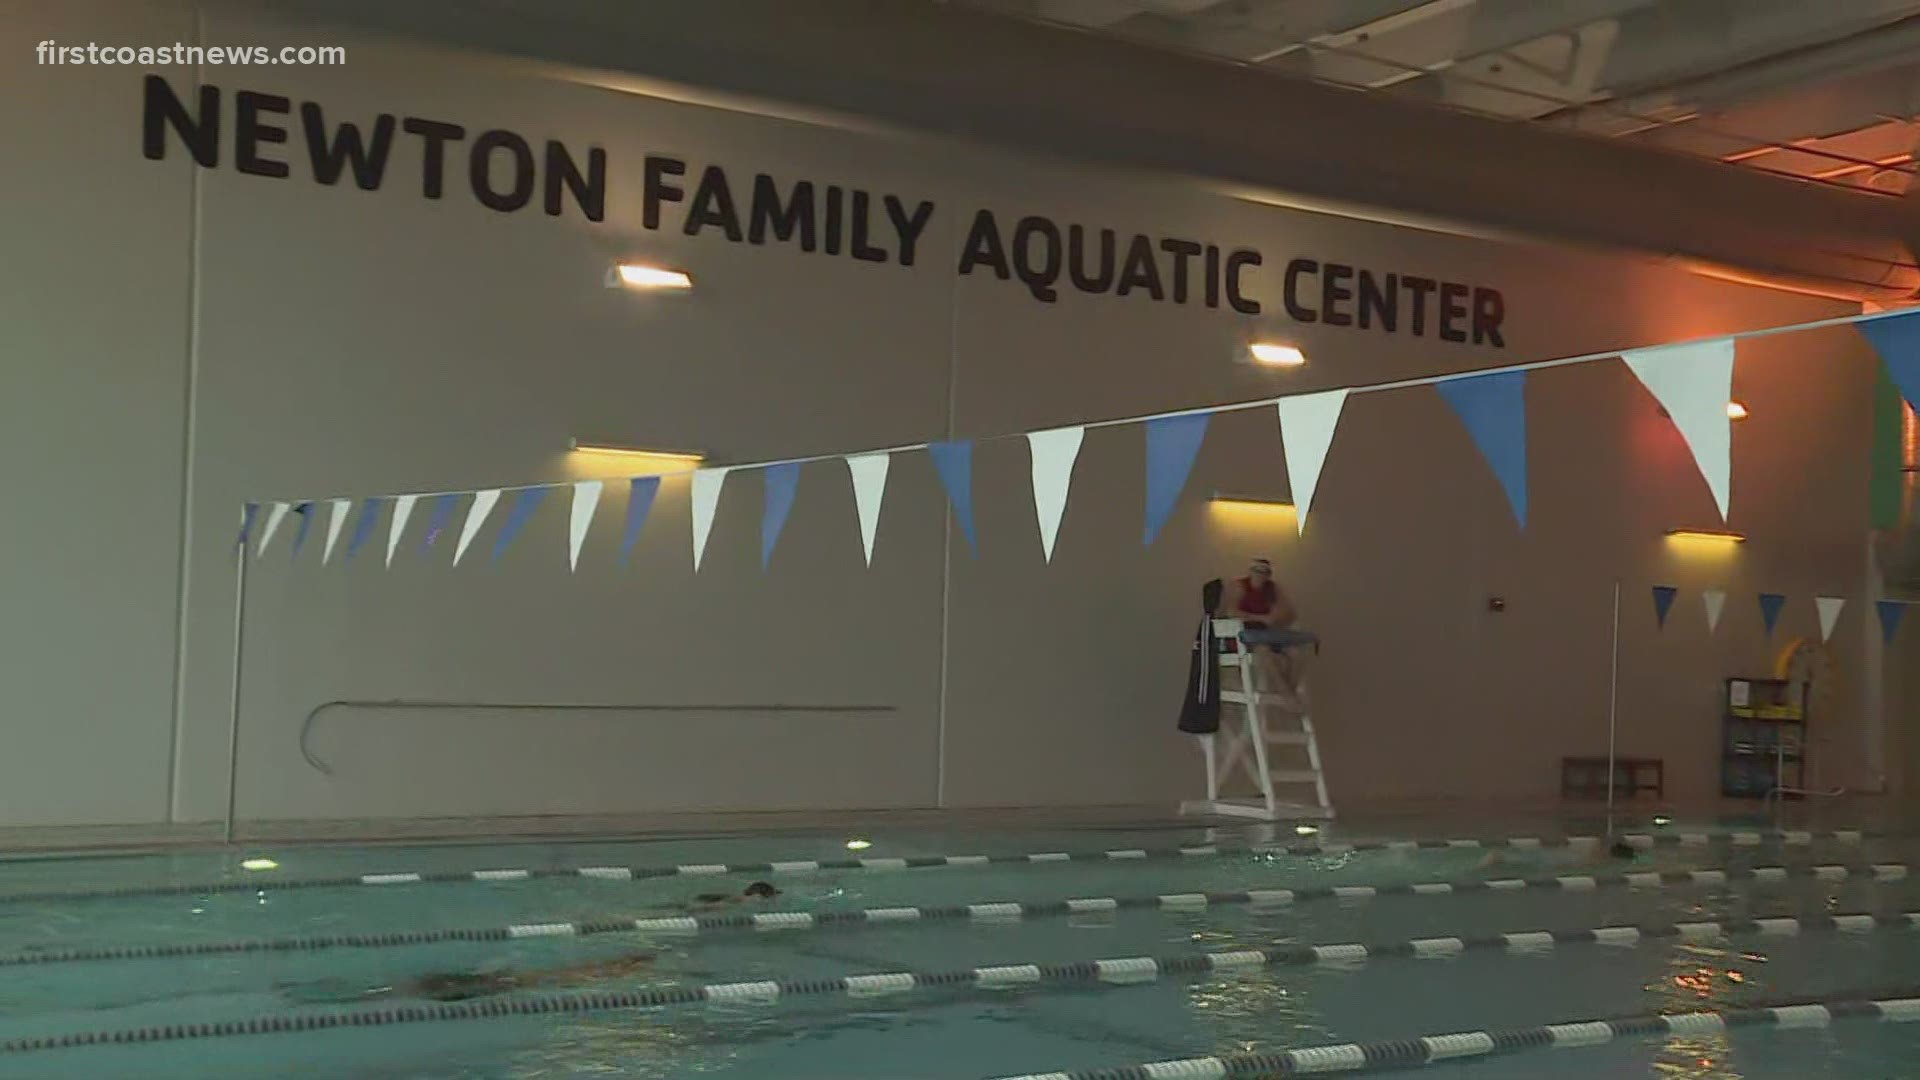 Interest in swimming lessons doubled after recent drownings on the First Coast